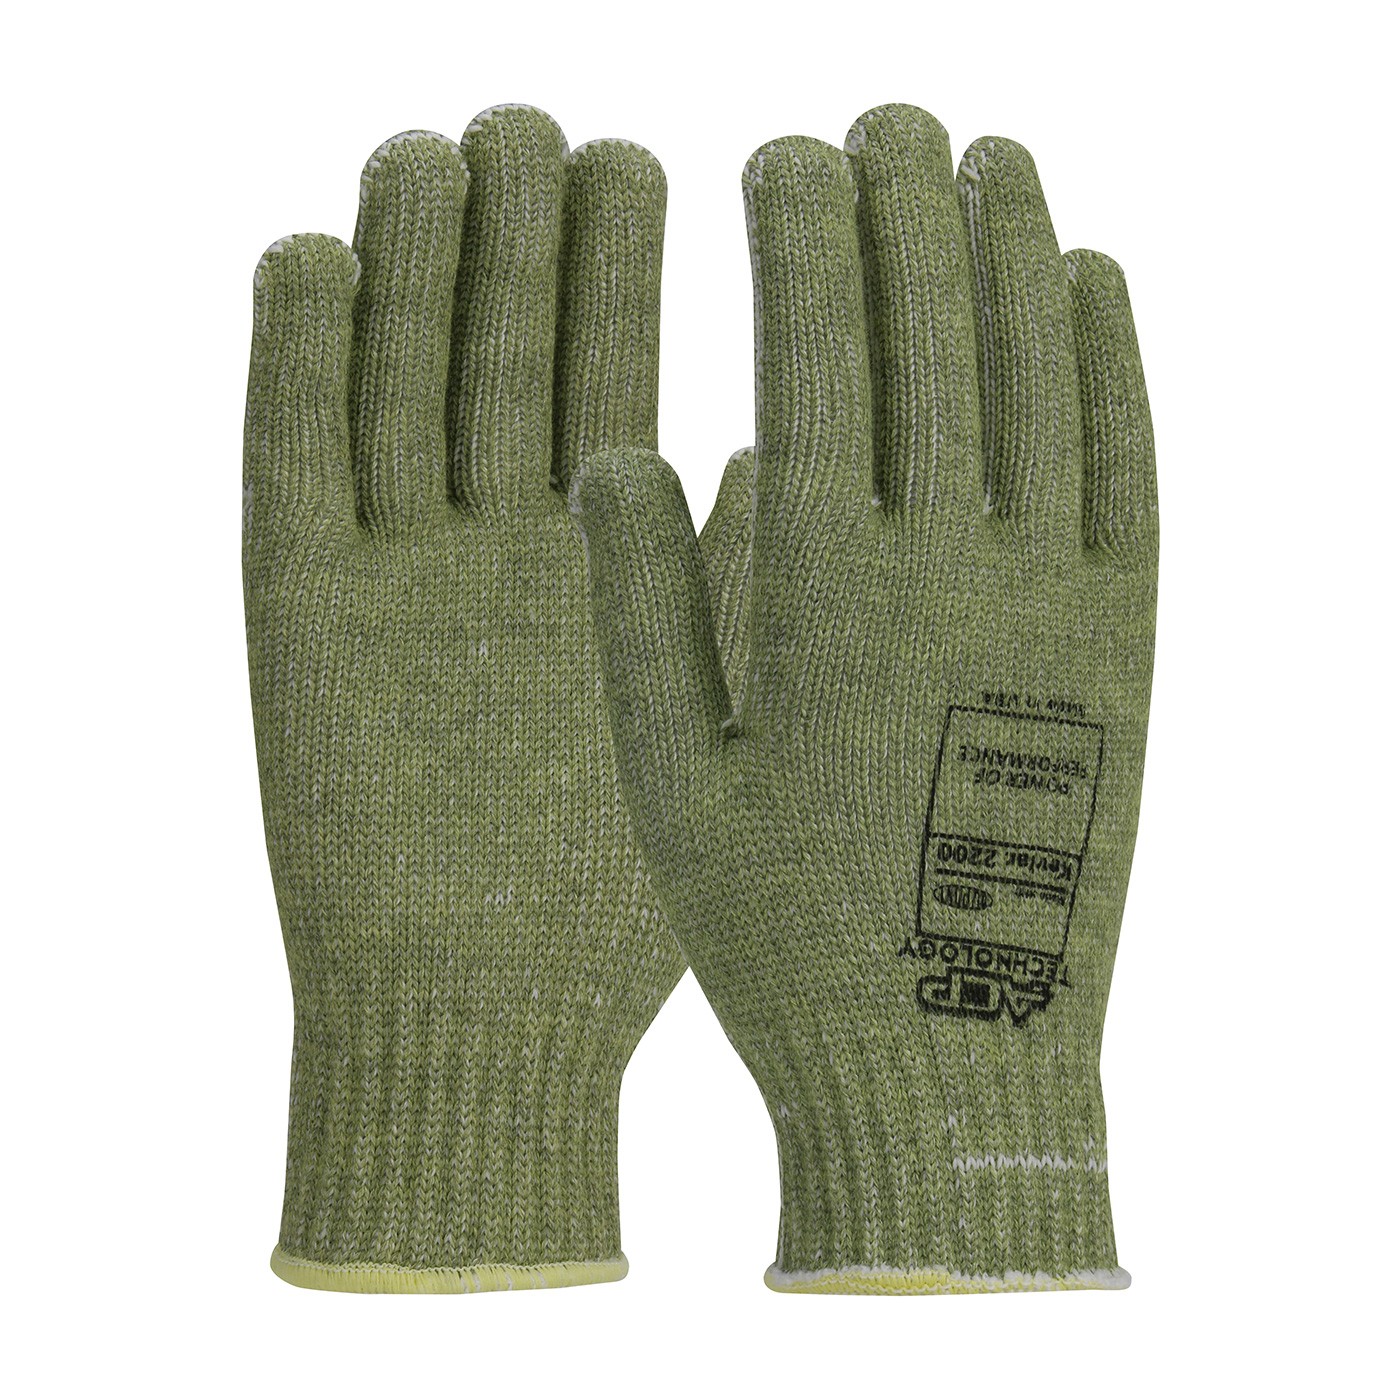 Kut Gard® Seamless Knit ACP / Kevlar® Blended Glove with Polyester Lining - Economy Weight  (#07-KA740)